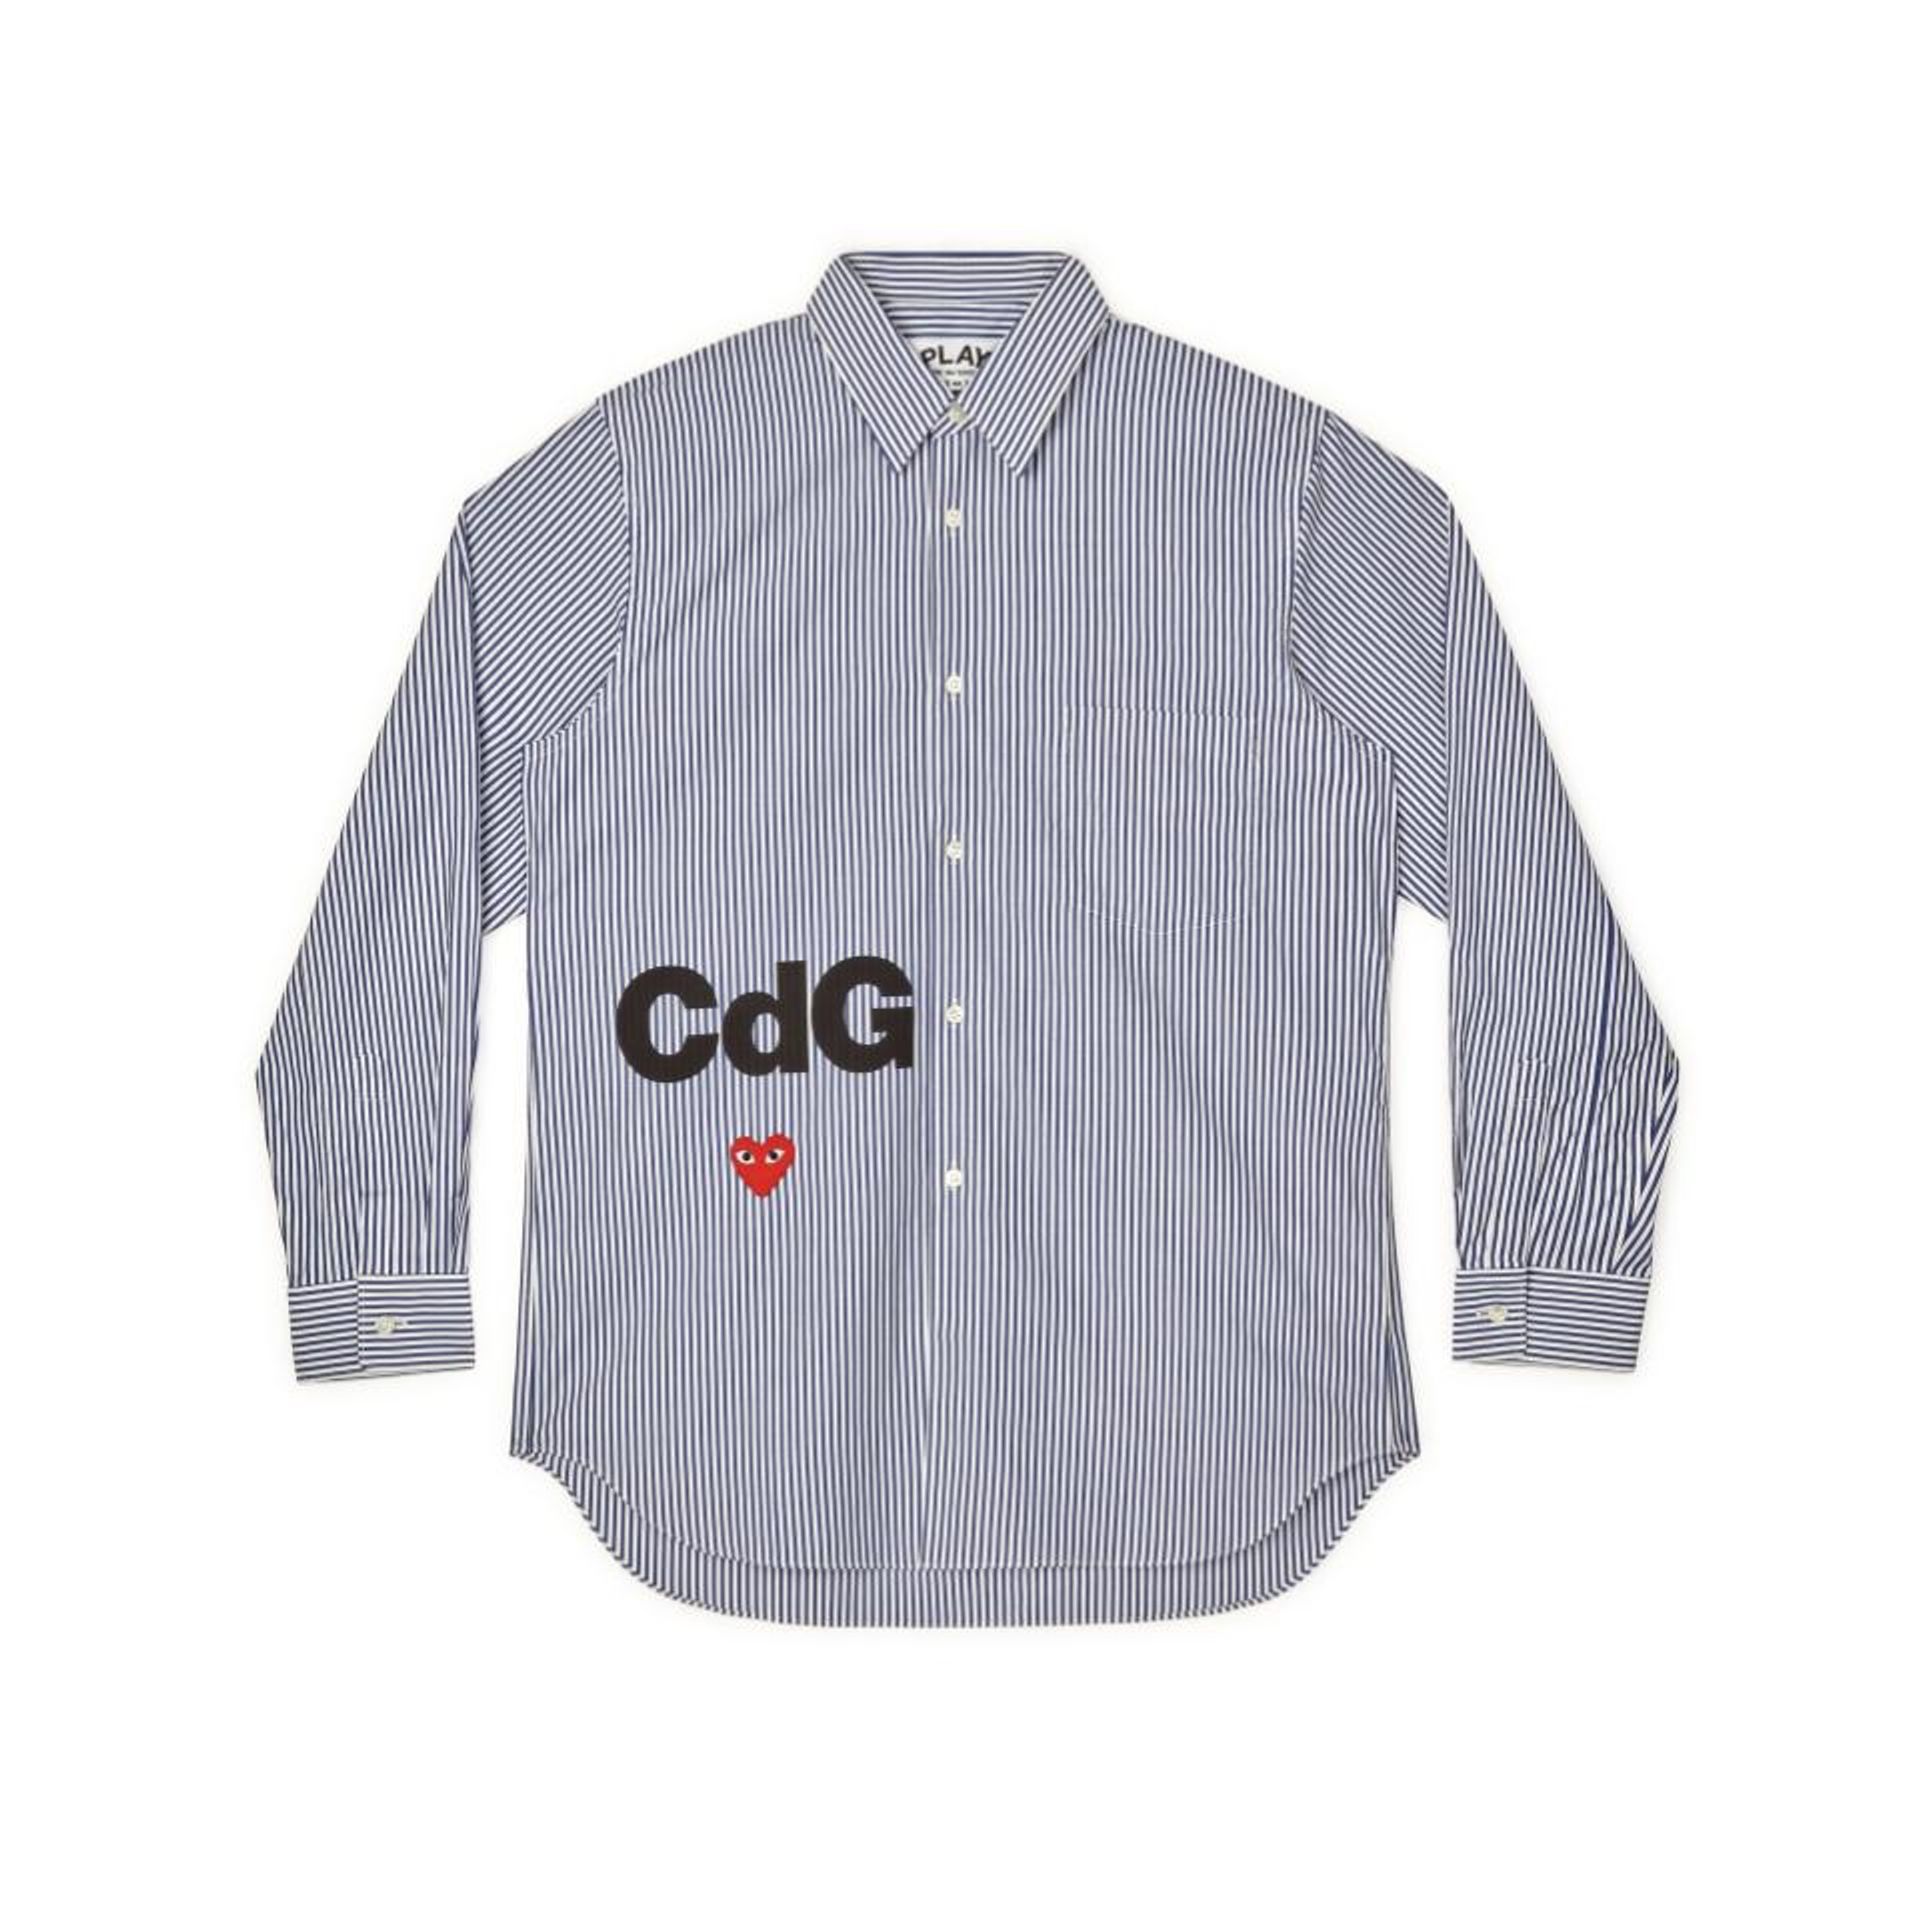 Play Together CDG Shirt (Ladies')